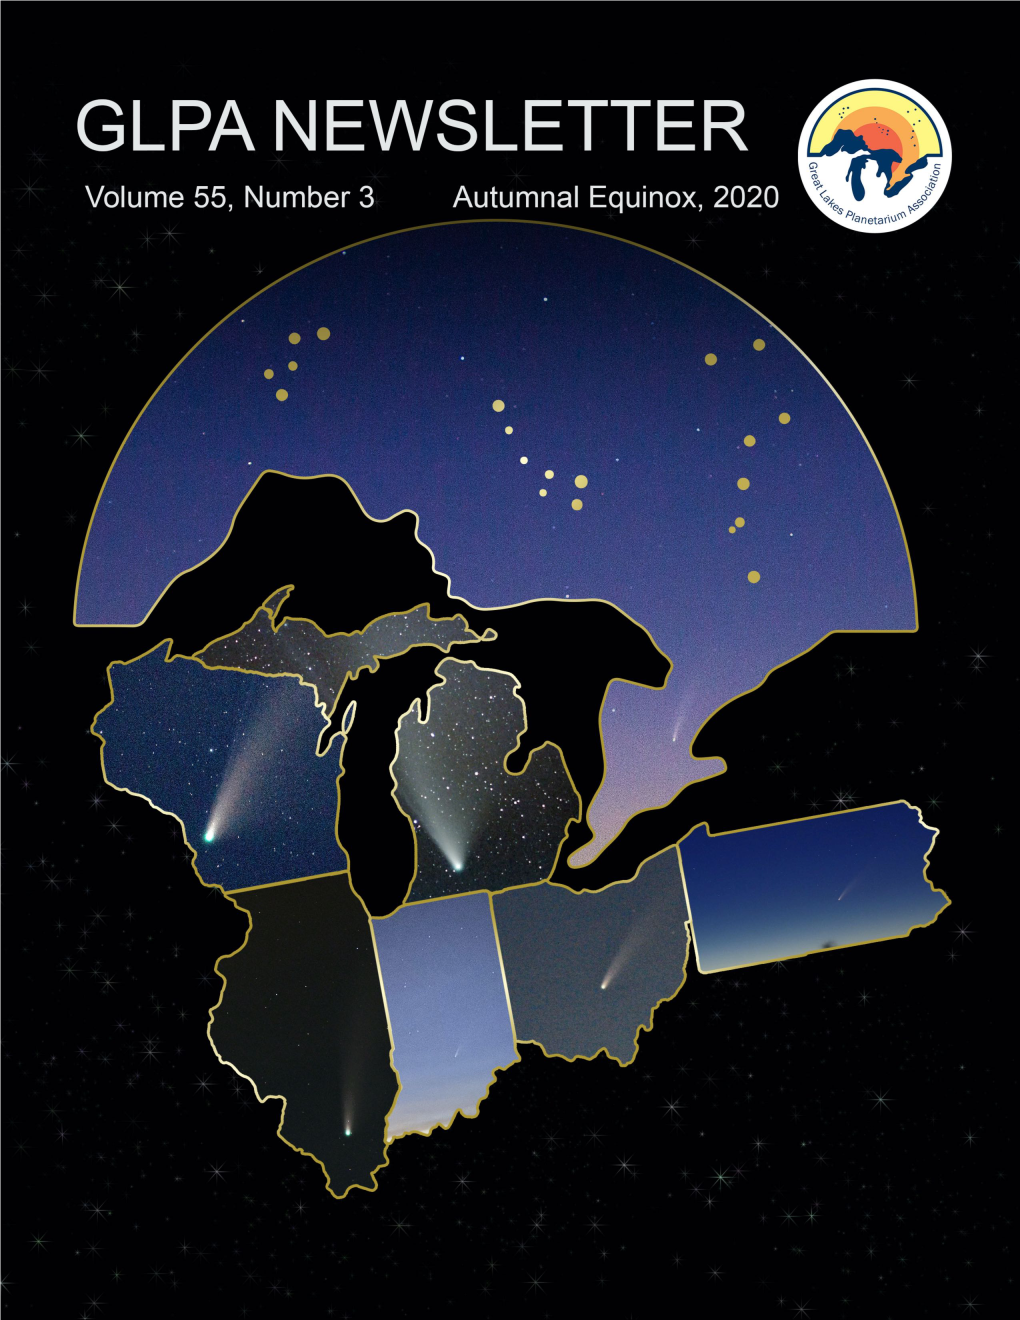 GLPA Newsletter Incorporates Small Sections of Several NASA Images for Its Page Mastheads